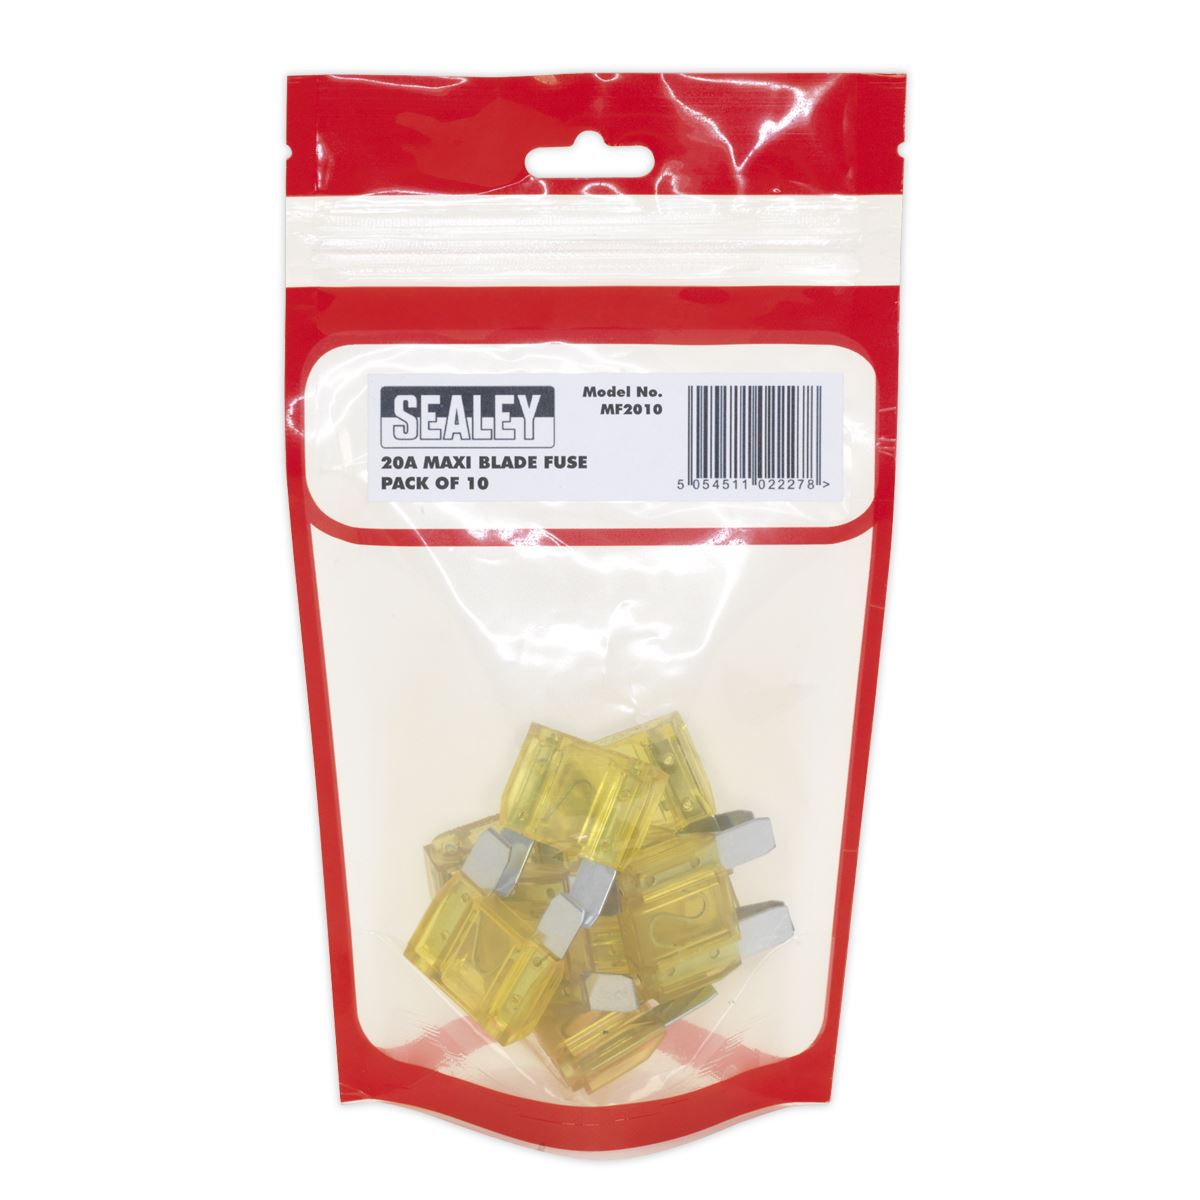 Sealey Automotive MAXI Blade Fuse 20A Pack of 10